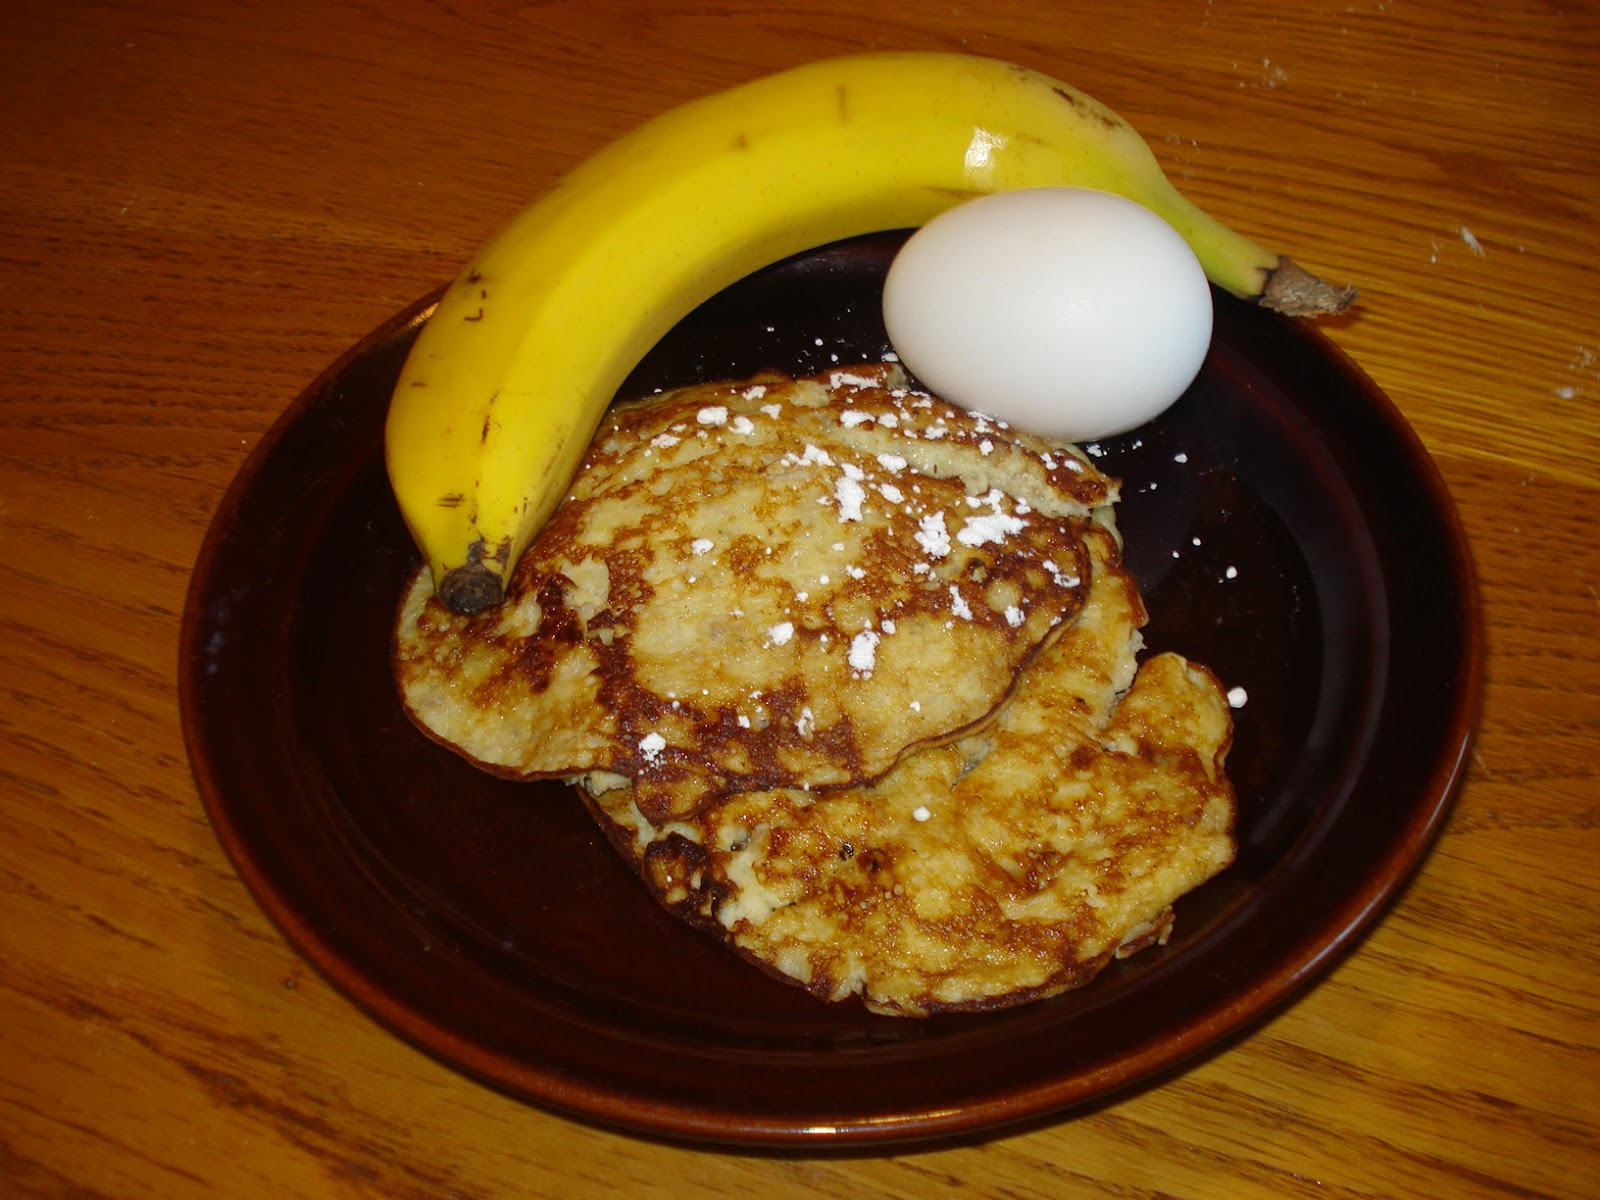 ideas a new how i came a across find pancakes with week make eggs banana made with to last pancake two  two and to